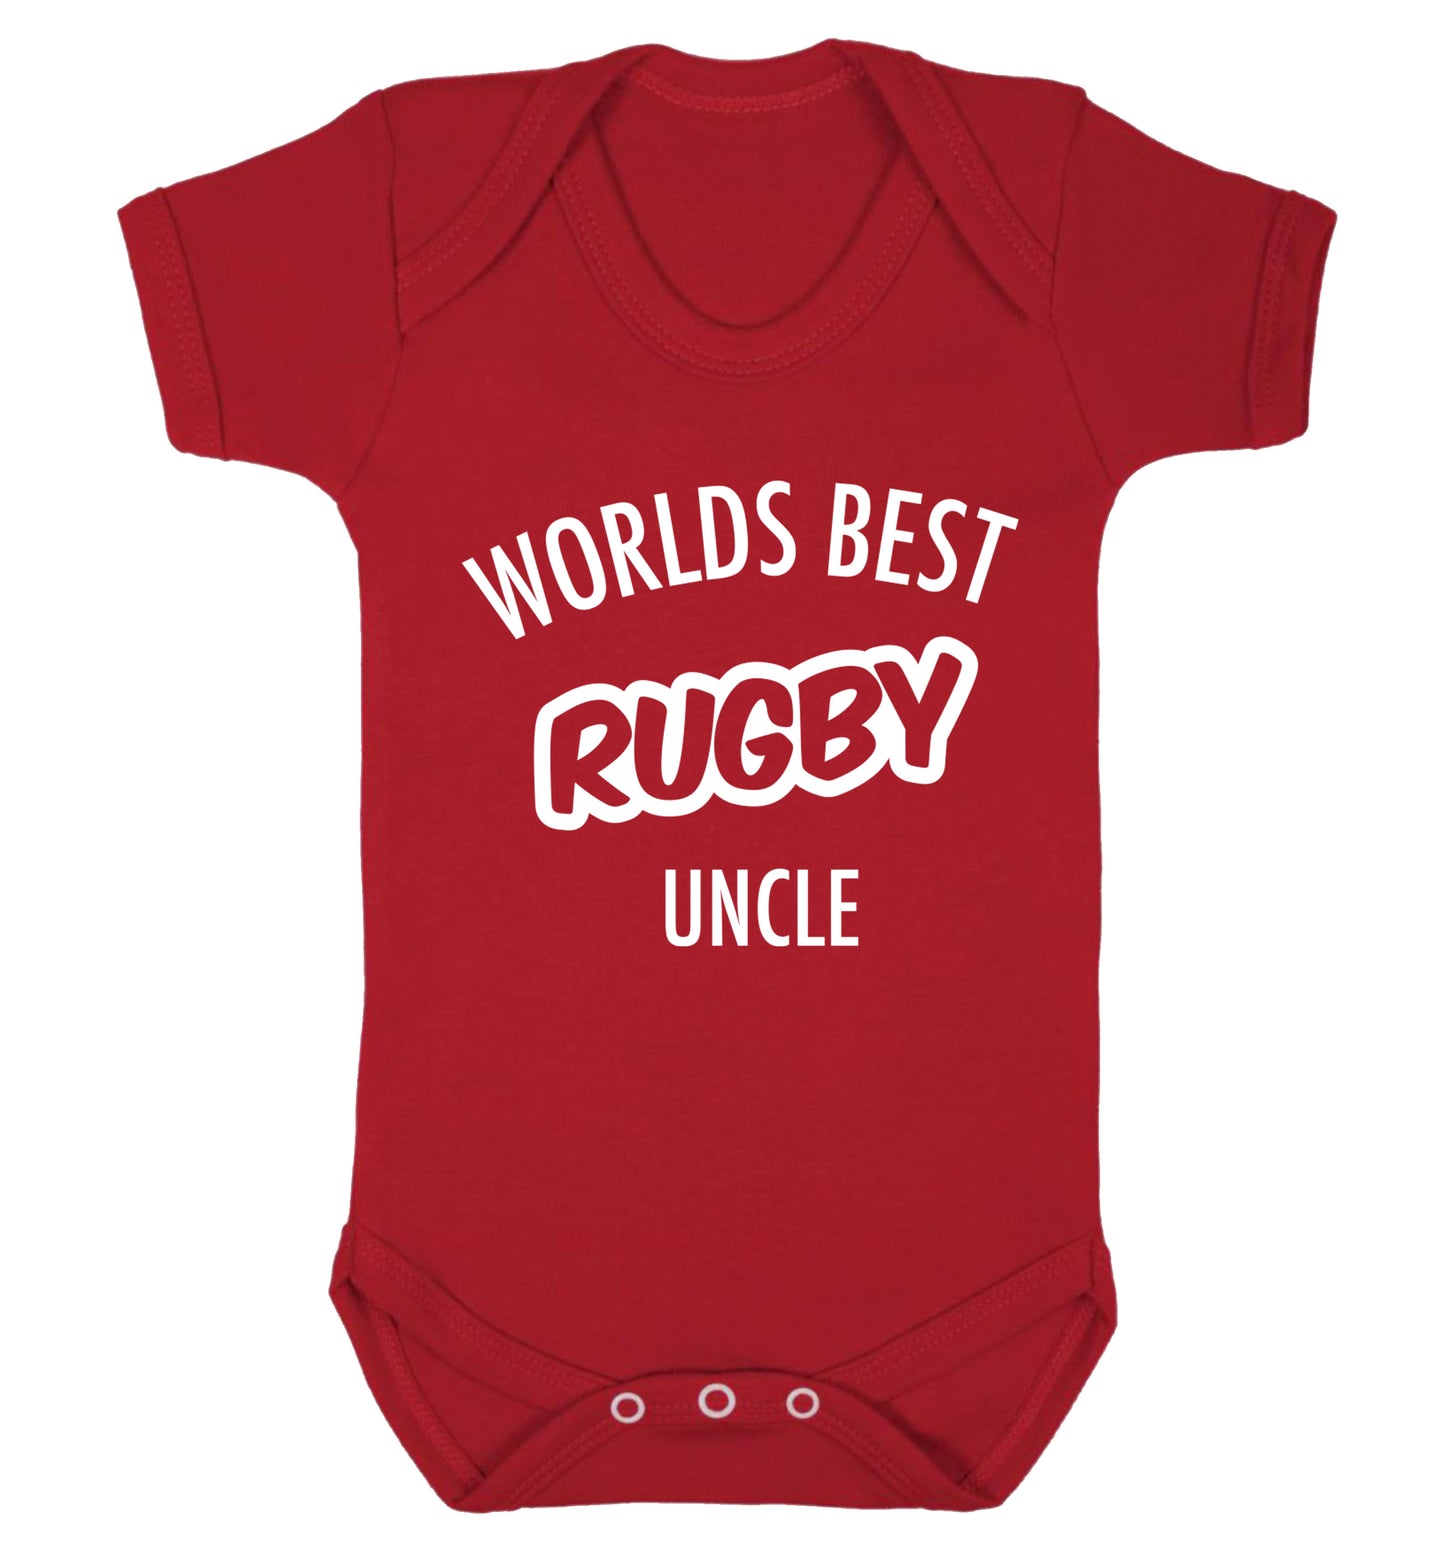 Worlds best rugby uncle Baby Vest red 18-24 months